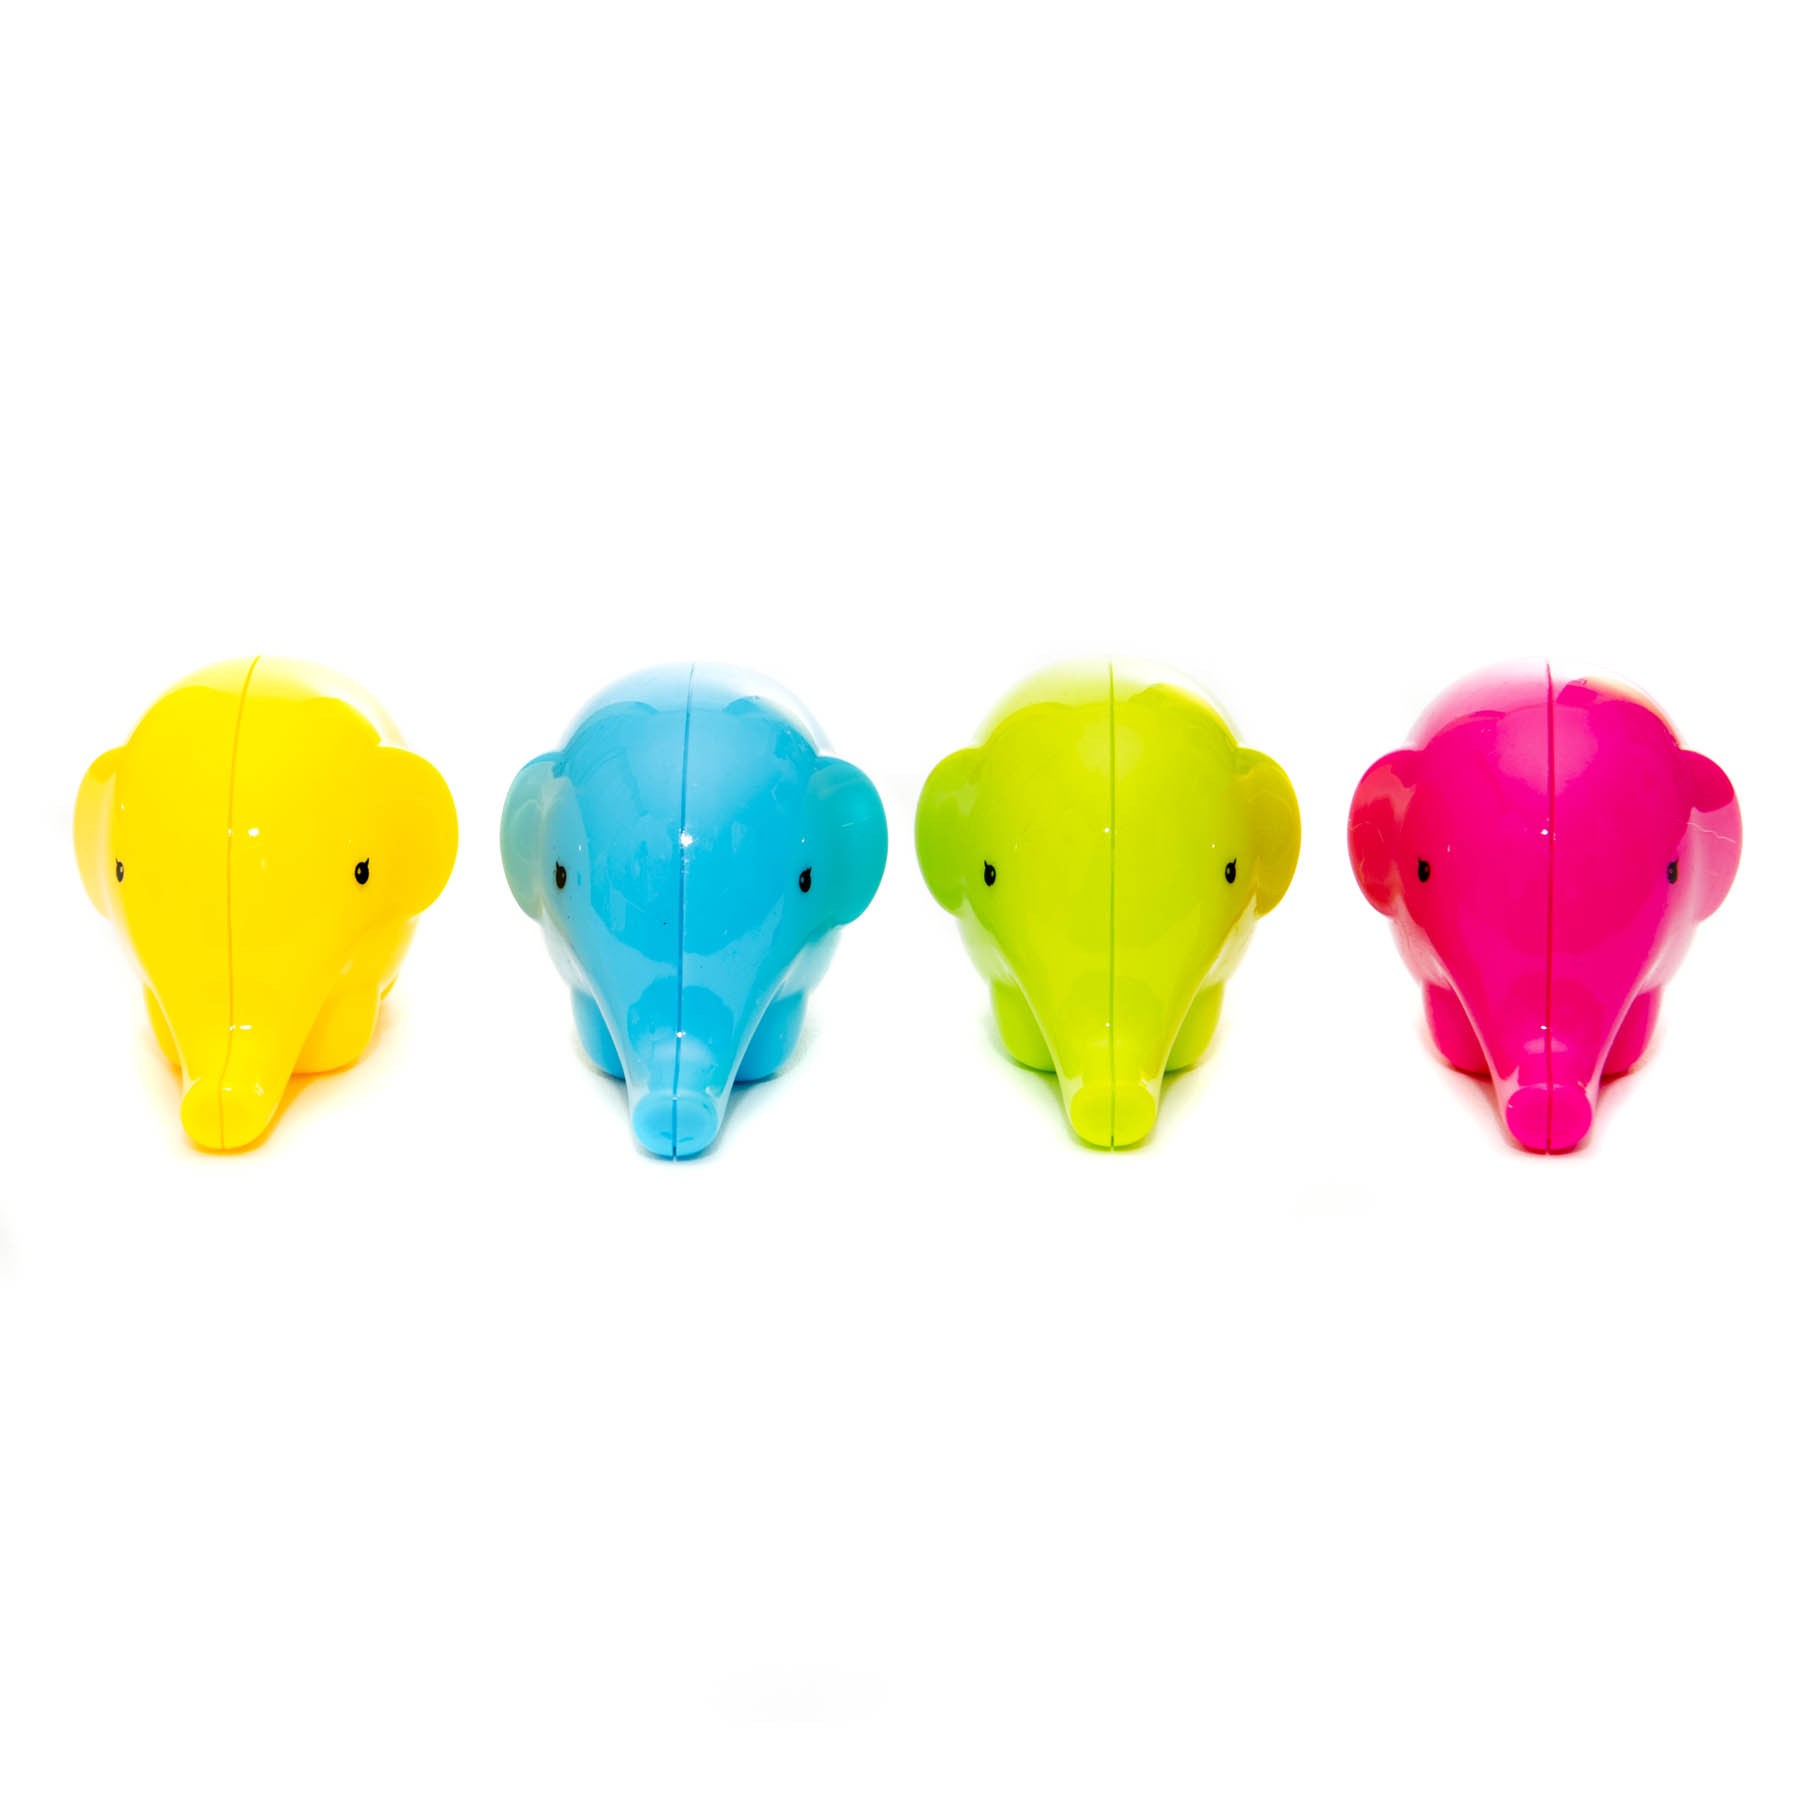 Elephant pencil sharpeners - pack of 4